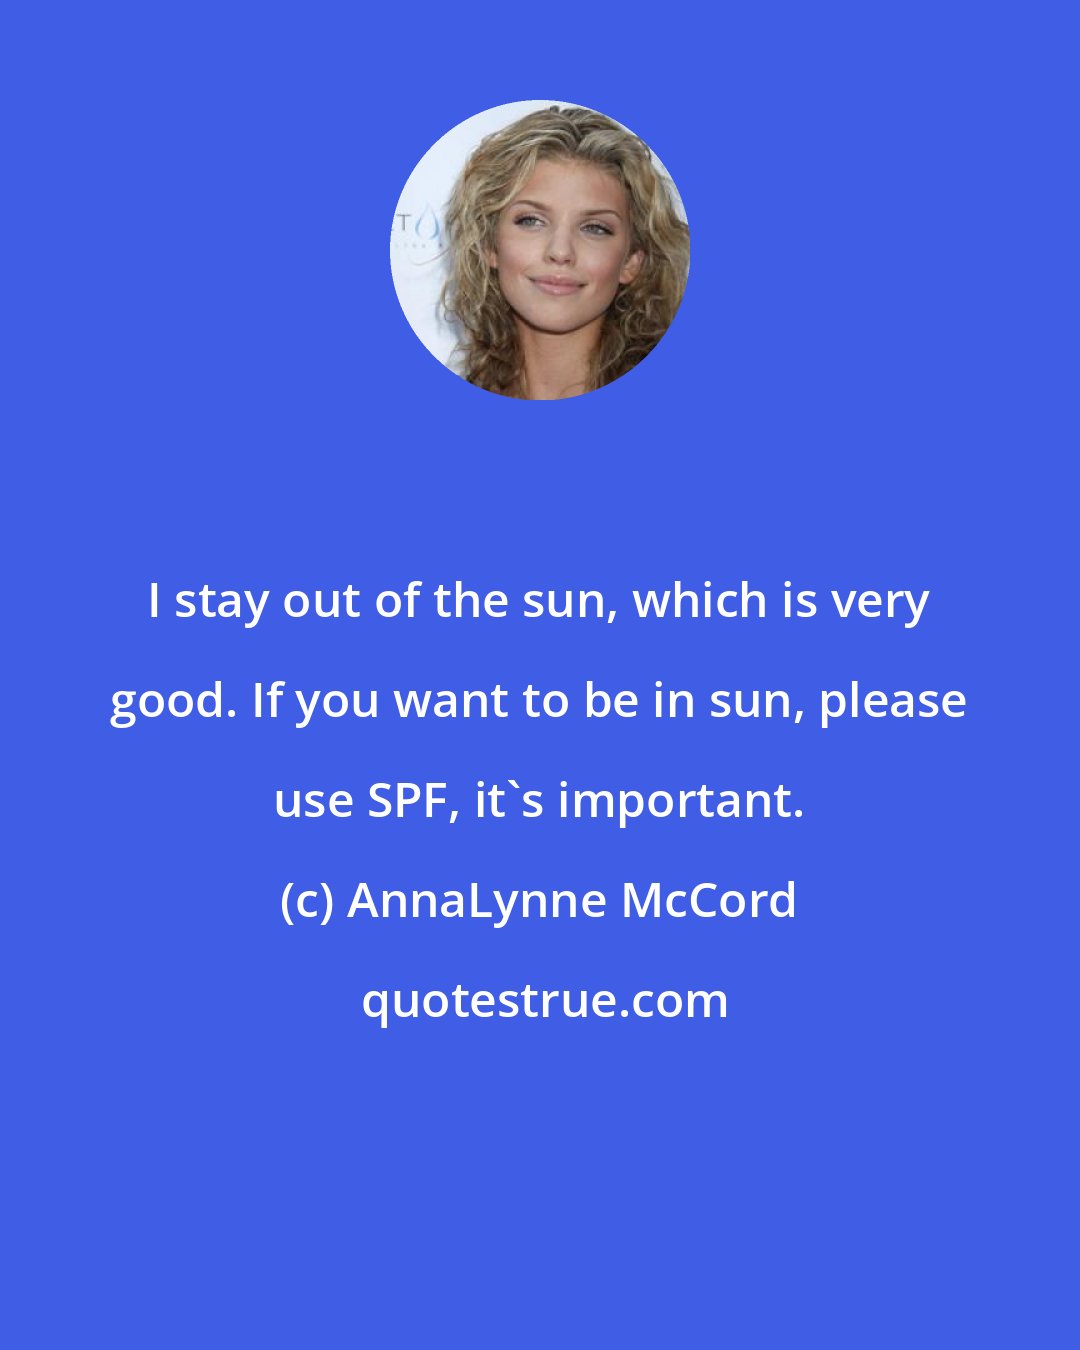 AnnaLynne McCord: I stay out of the sun, which is very good. If you want to be in sun, please use SPF, it's important.